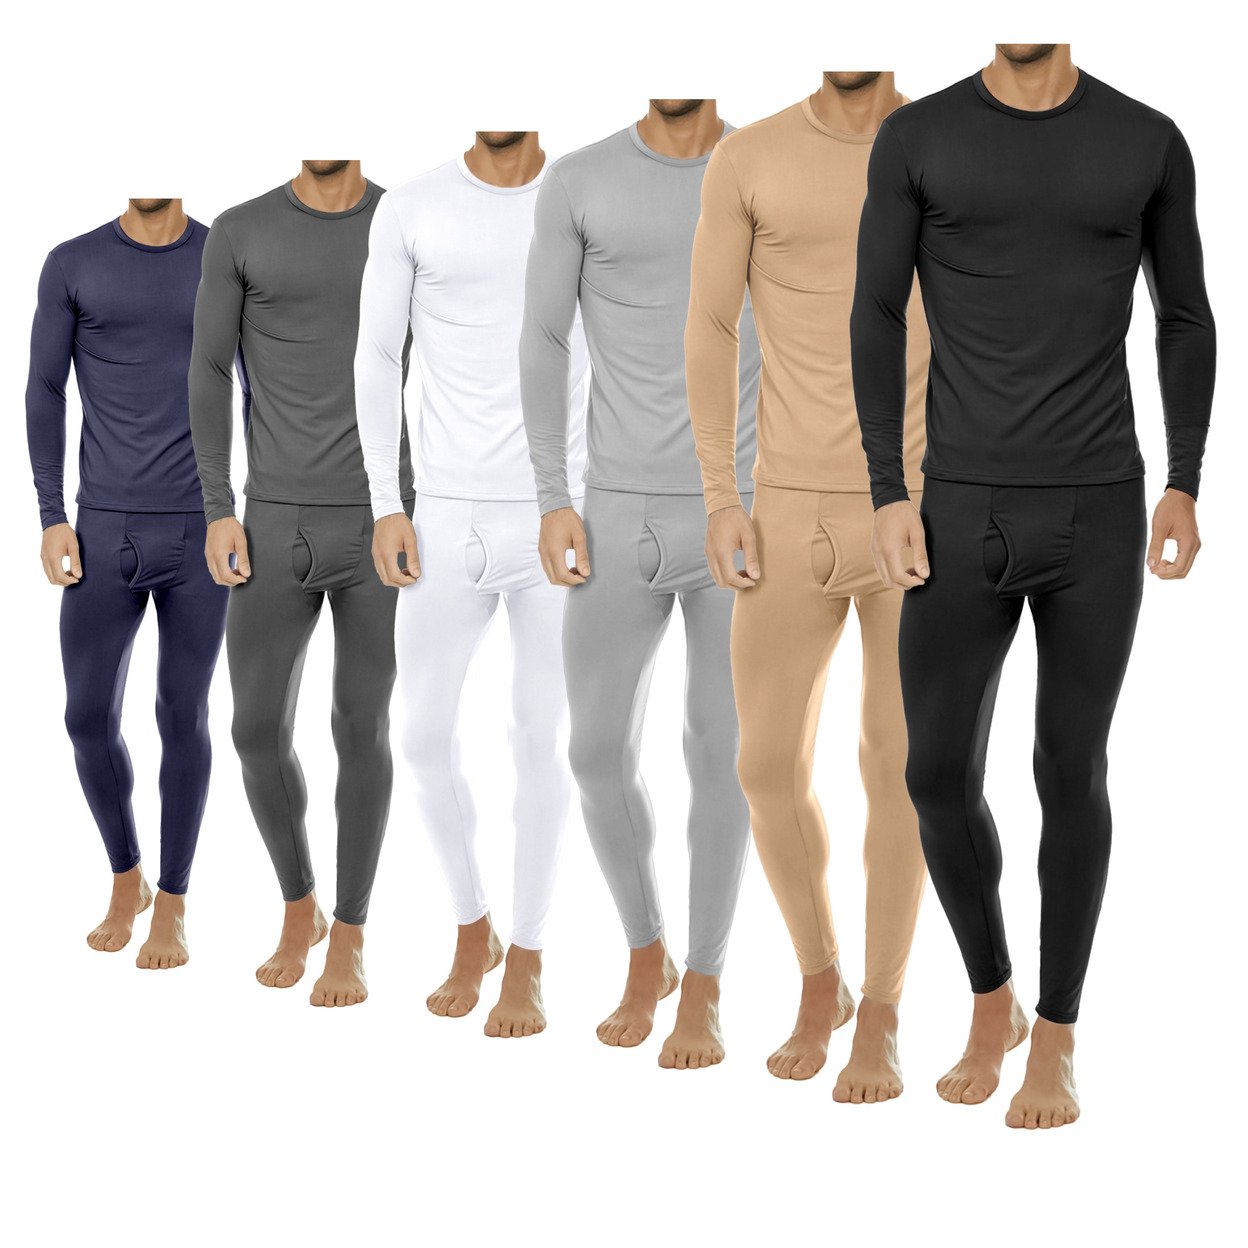 2-Sets: Men's Winter Warm Fleece Lined Thermal Underwear Set For Cold Weather - Black&grey, Xx-large